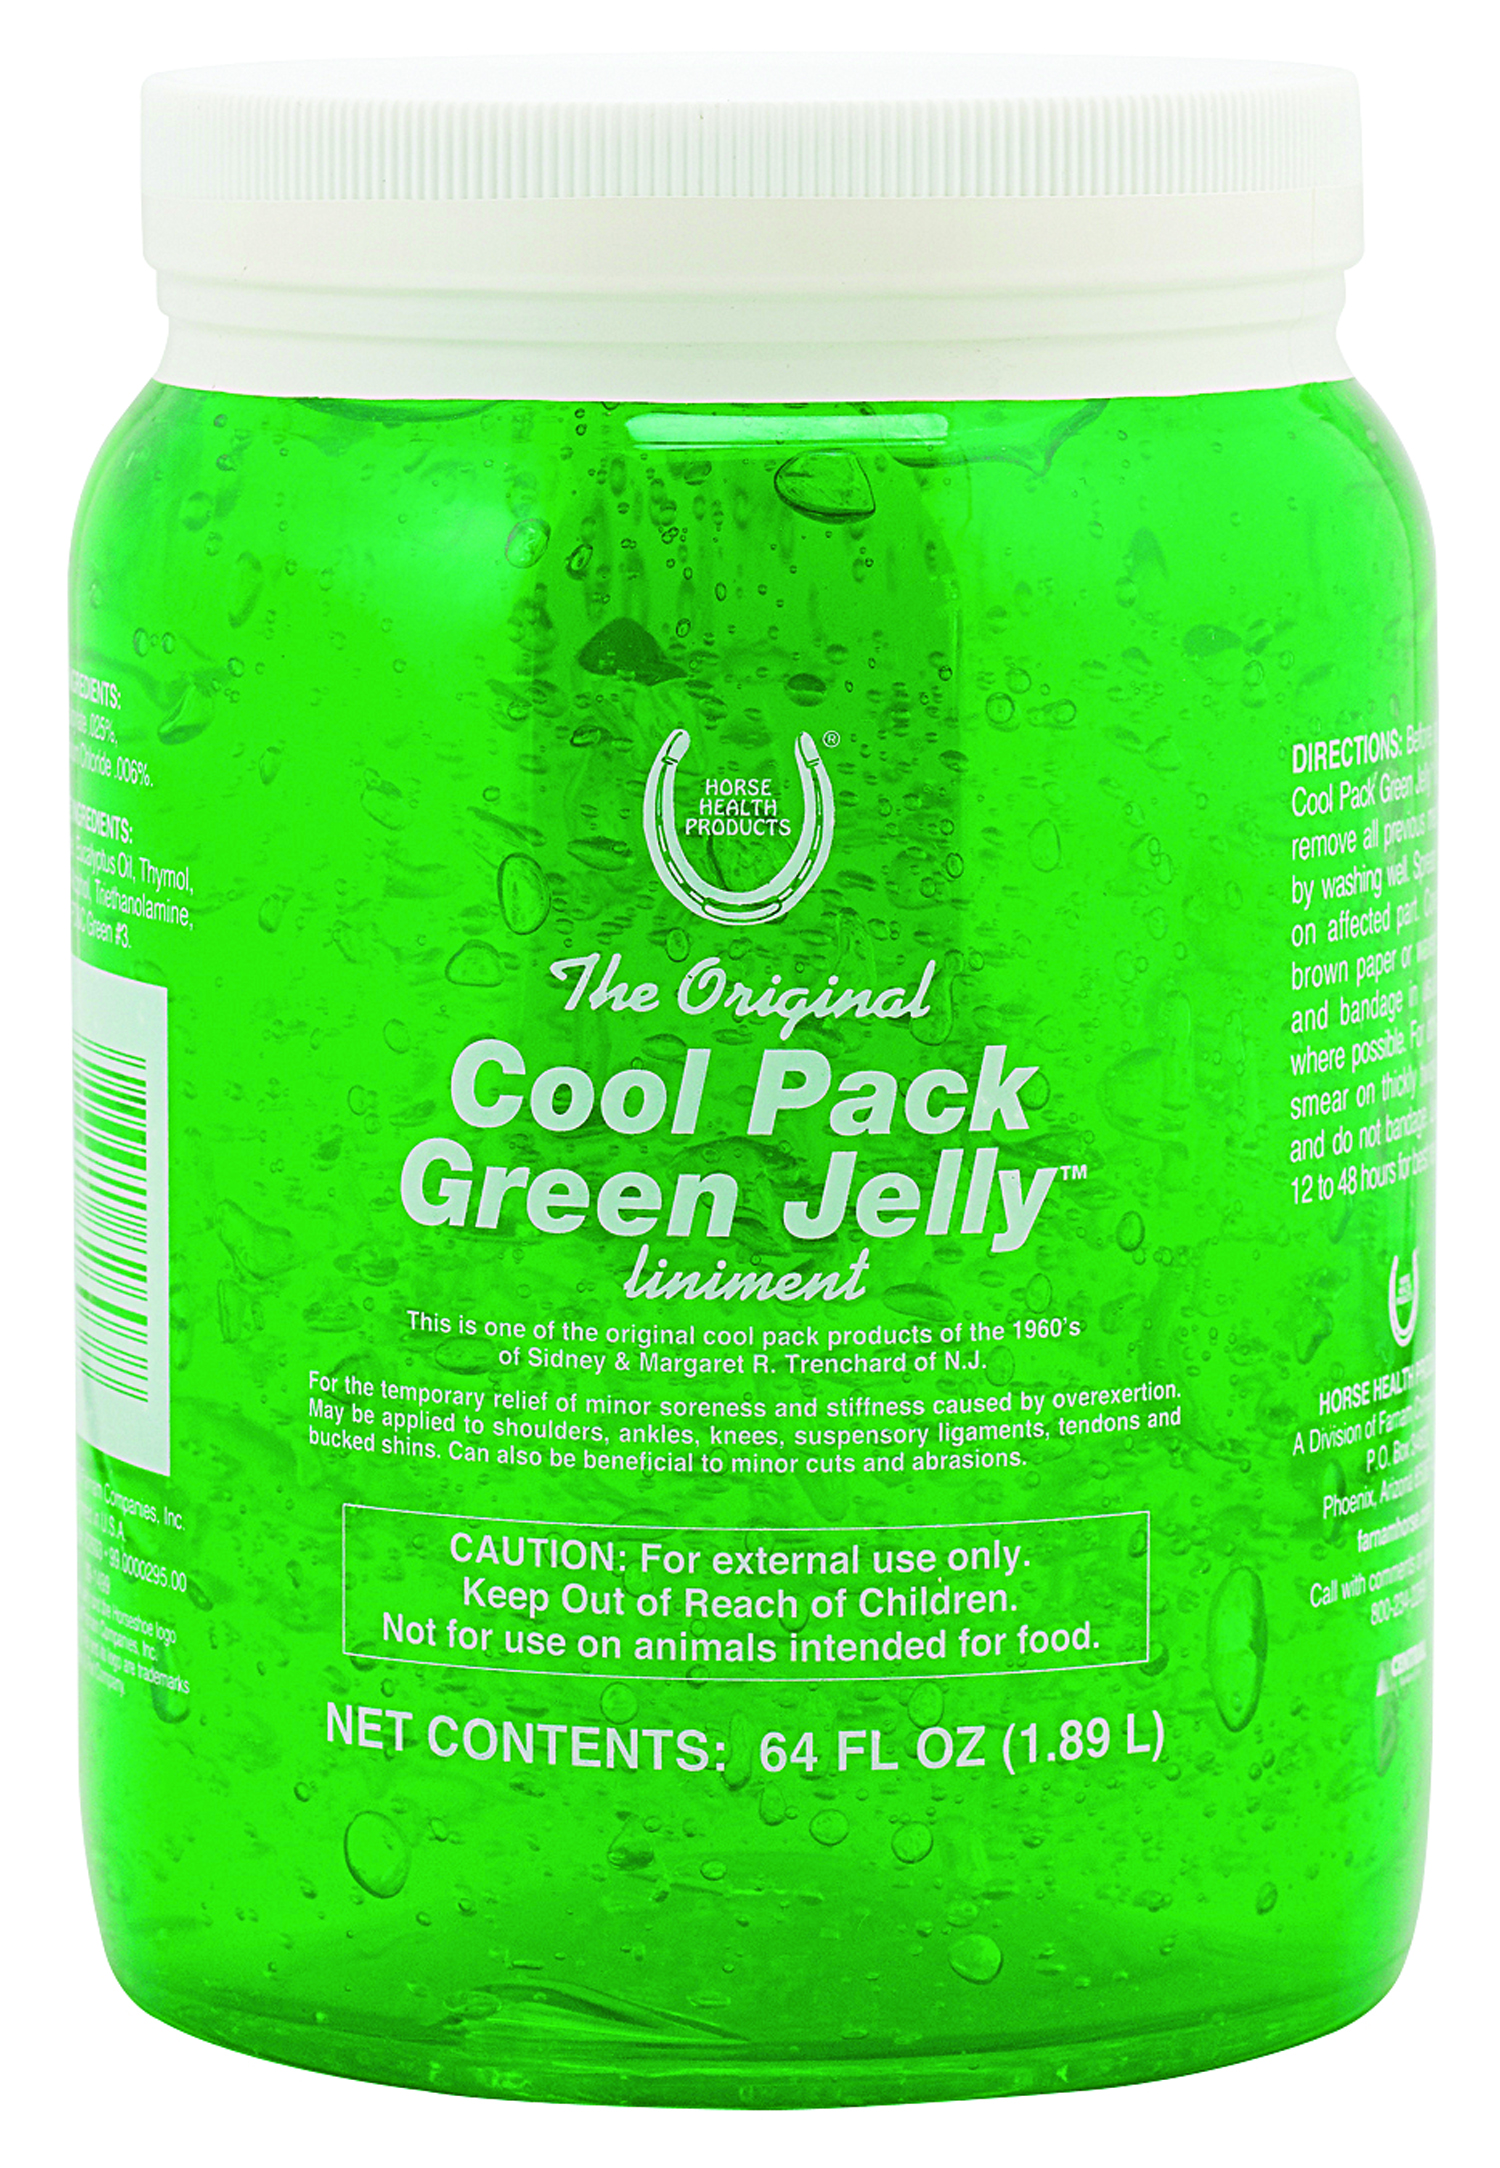 Cool Pack Green Jelly 1/2 gallon